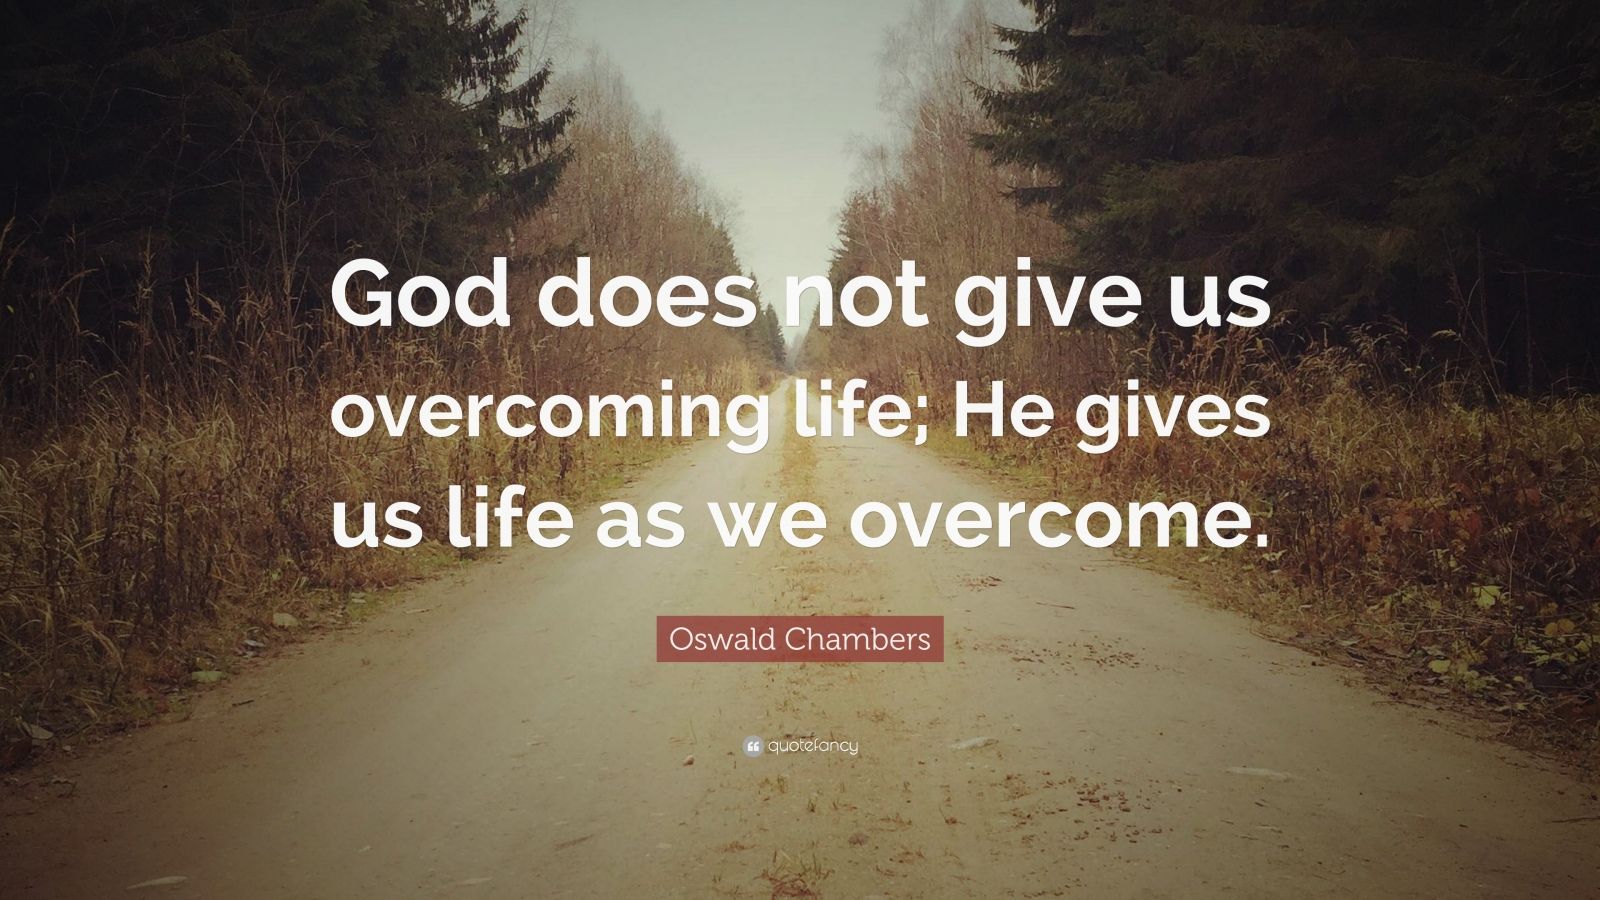 Oswald Chambers Quote: “God does not give us overcoming life; He gives ...